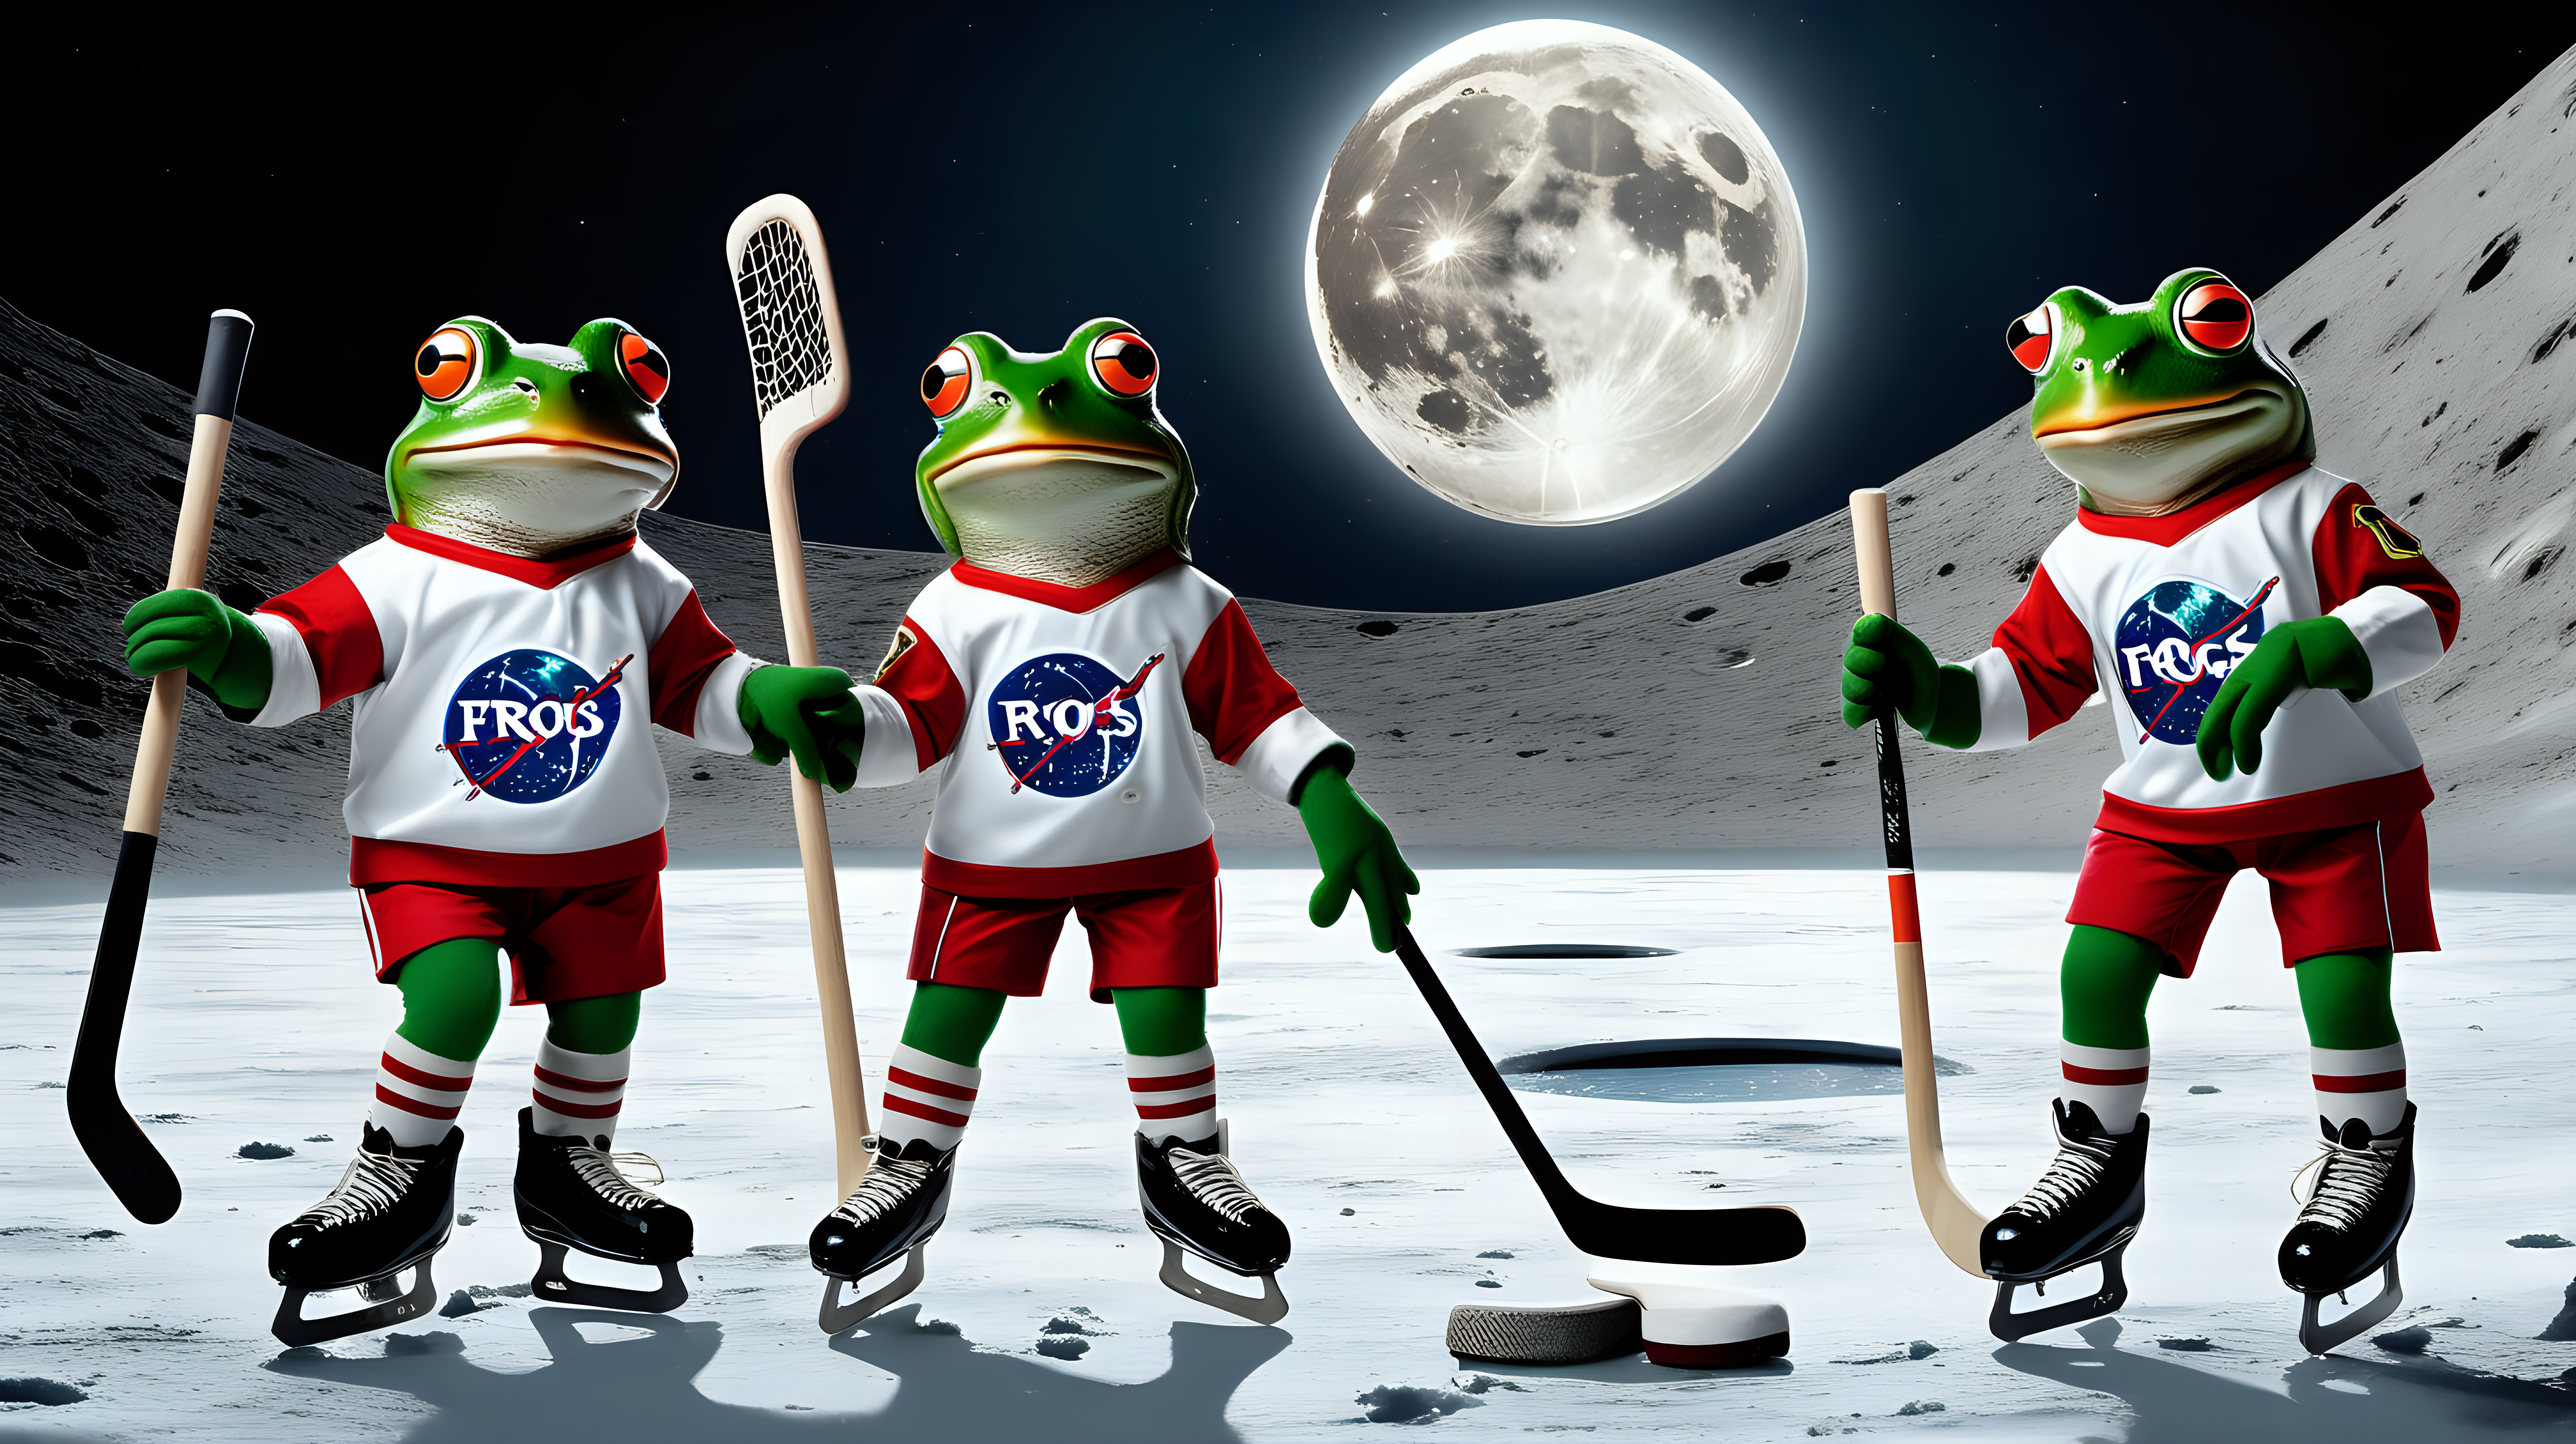 frogs dressed in uniforms and ice skates playing